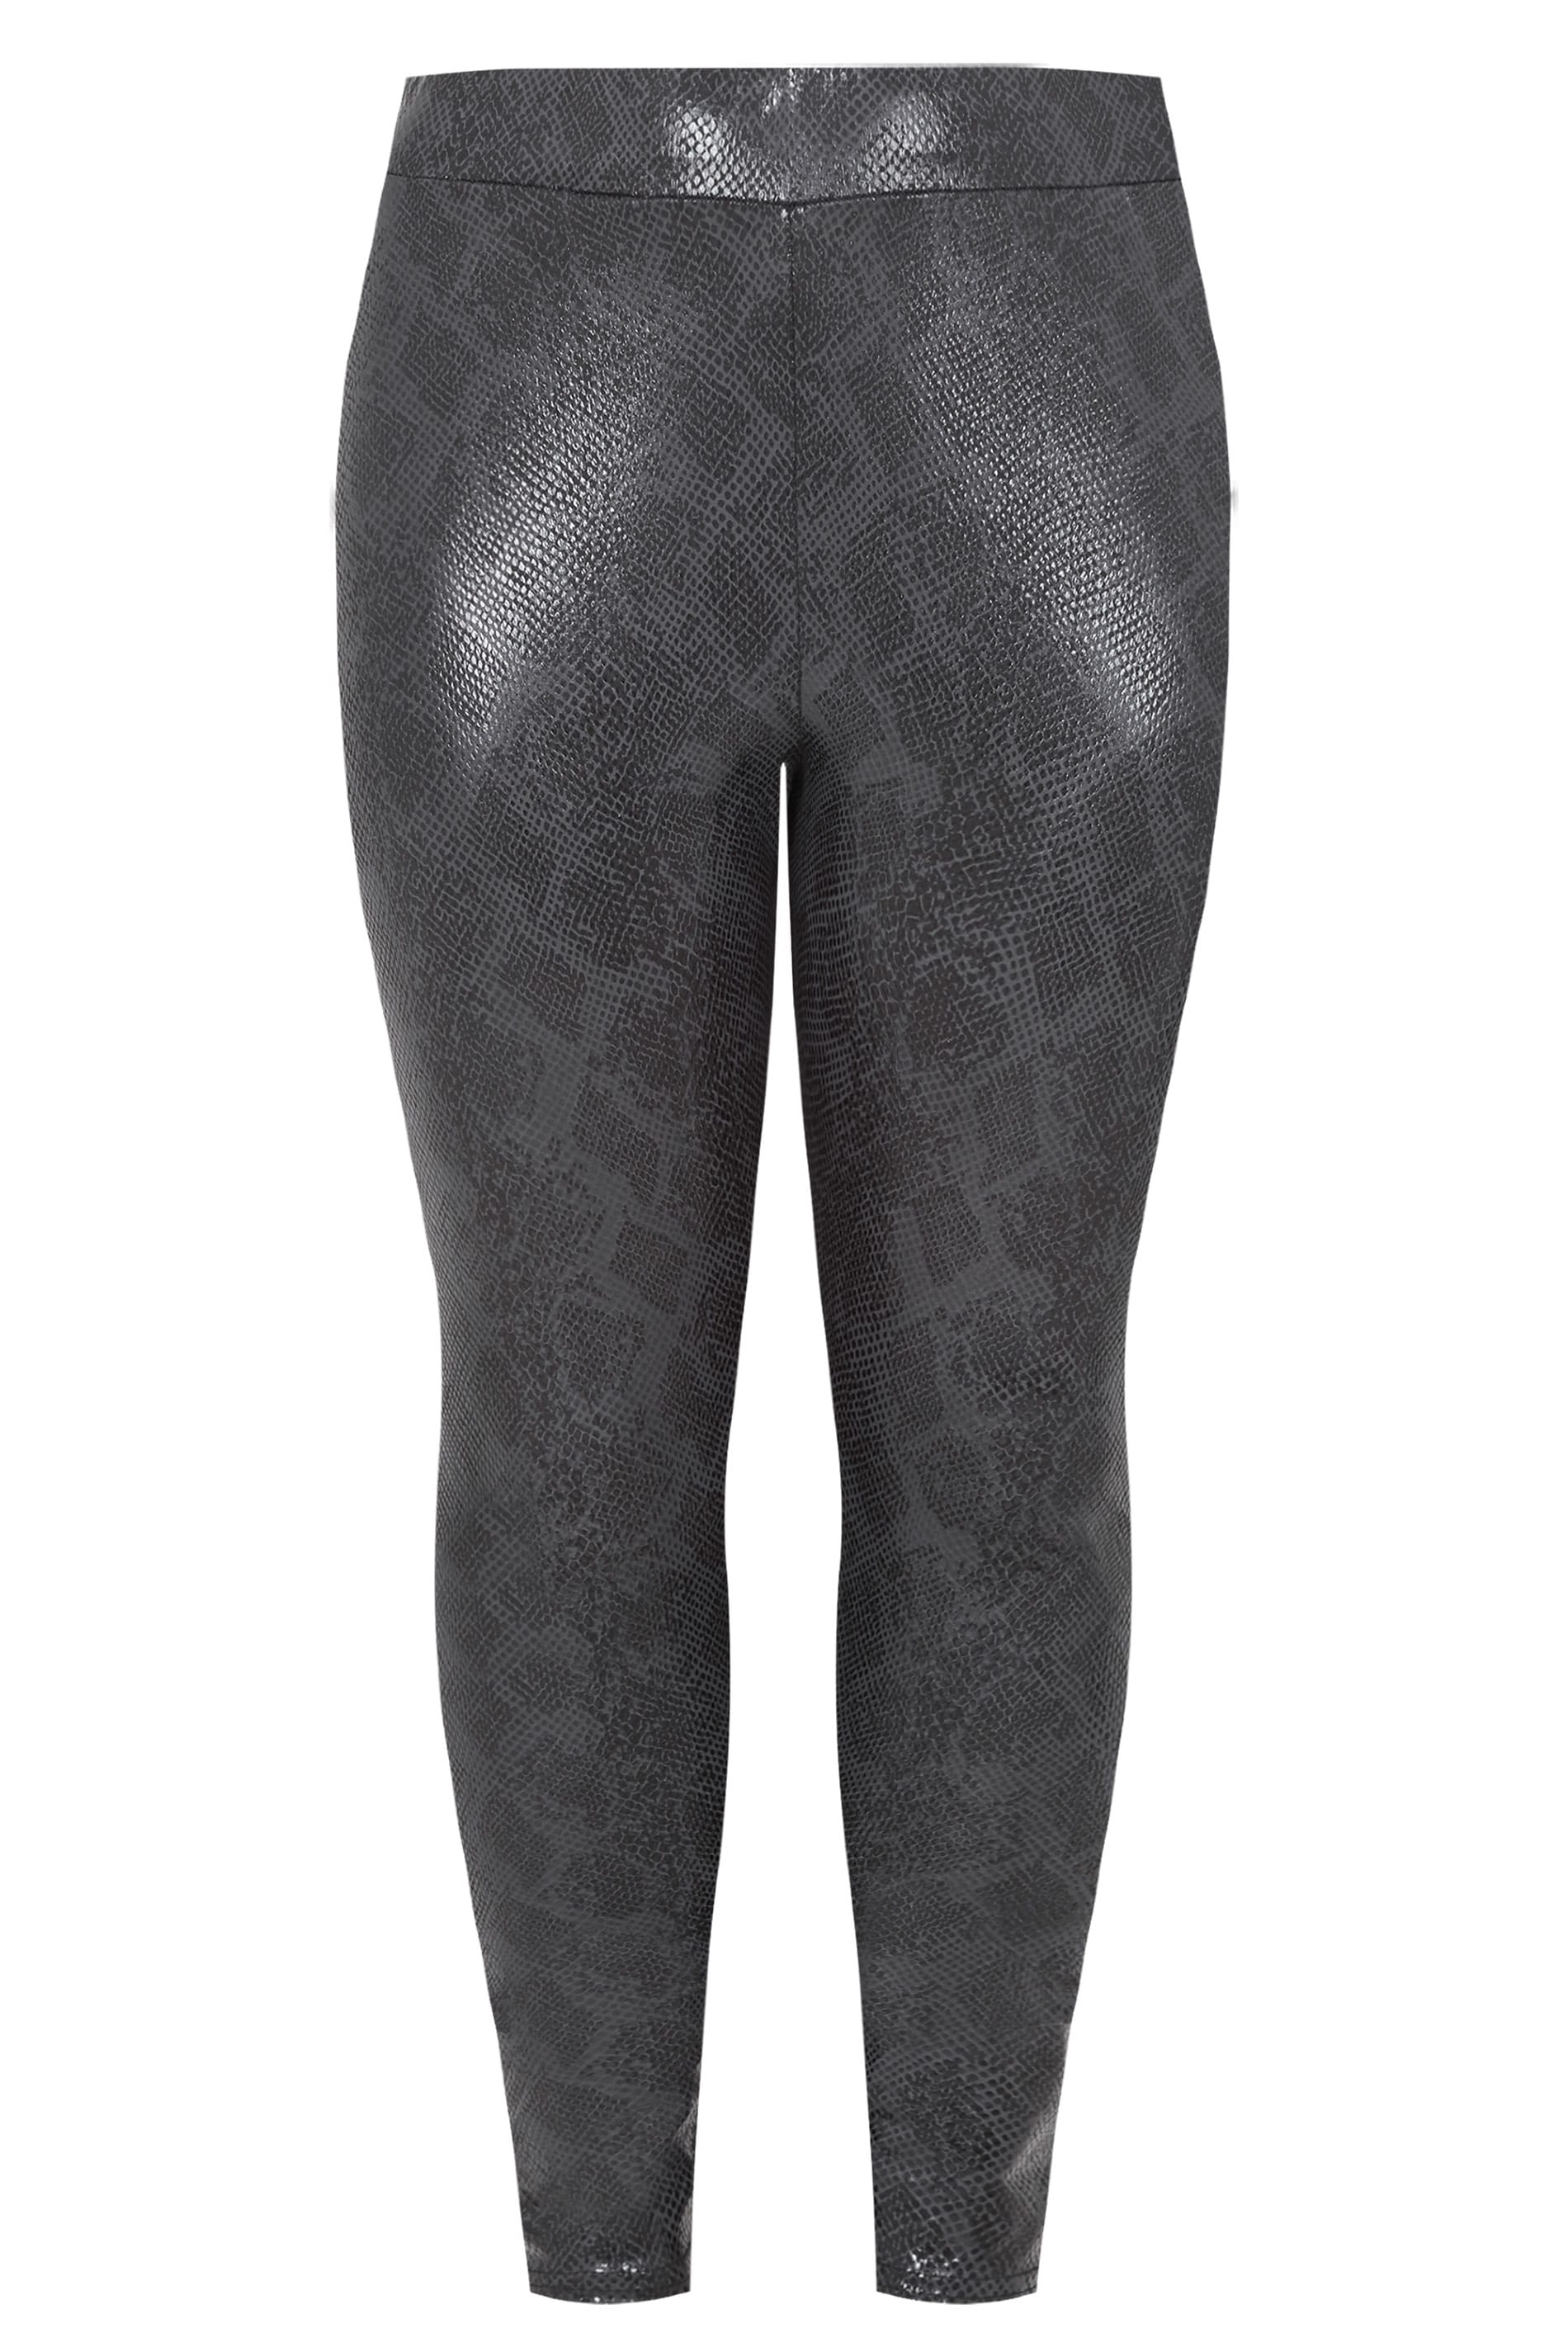 YOURS LONDON Black Textured Snake Print Leggings, Plus size 16 to 36